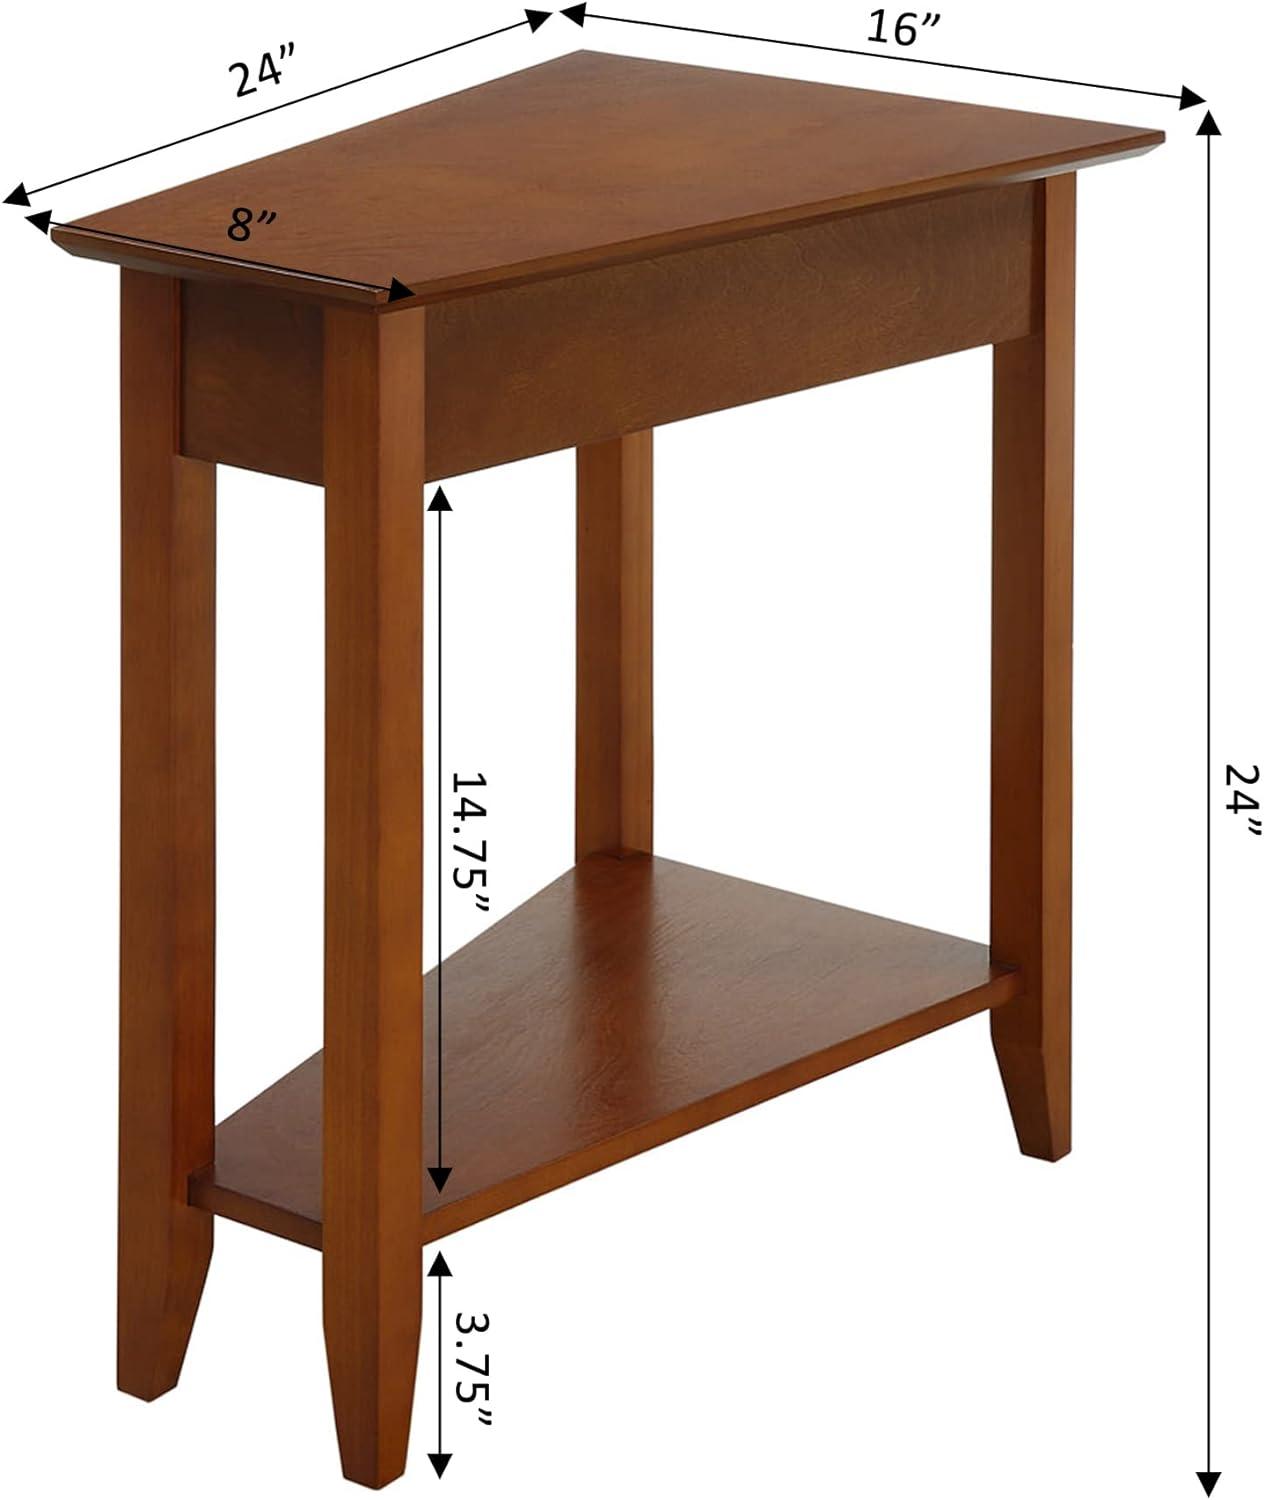 Triangular Cherry Wood and Metal Wedge End Table with Shelf